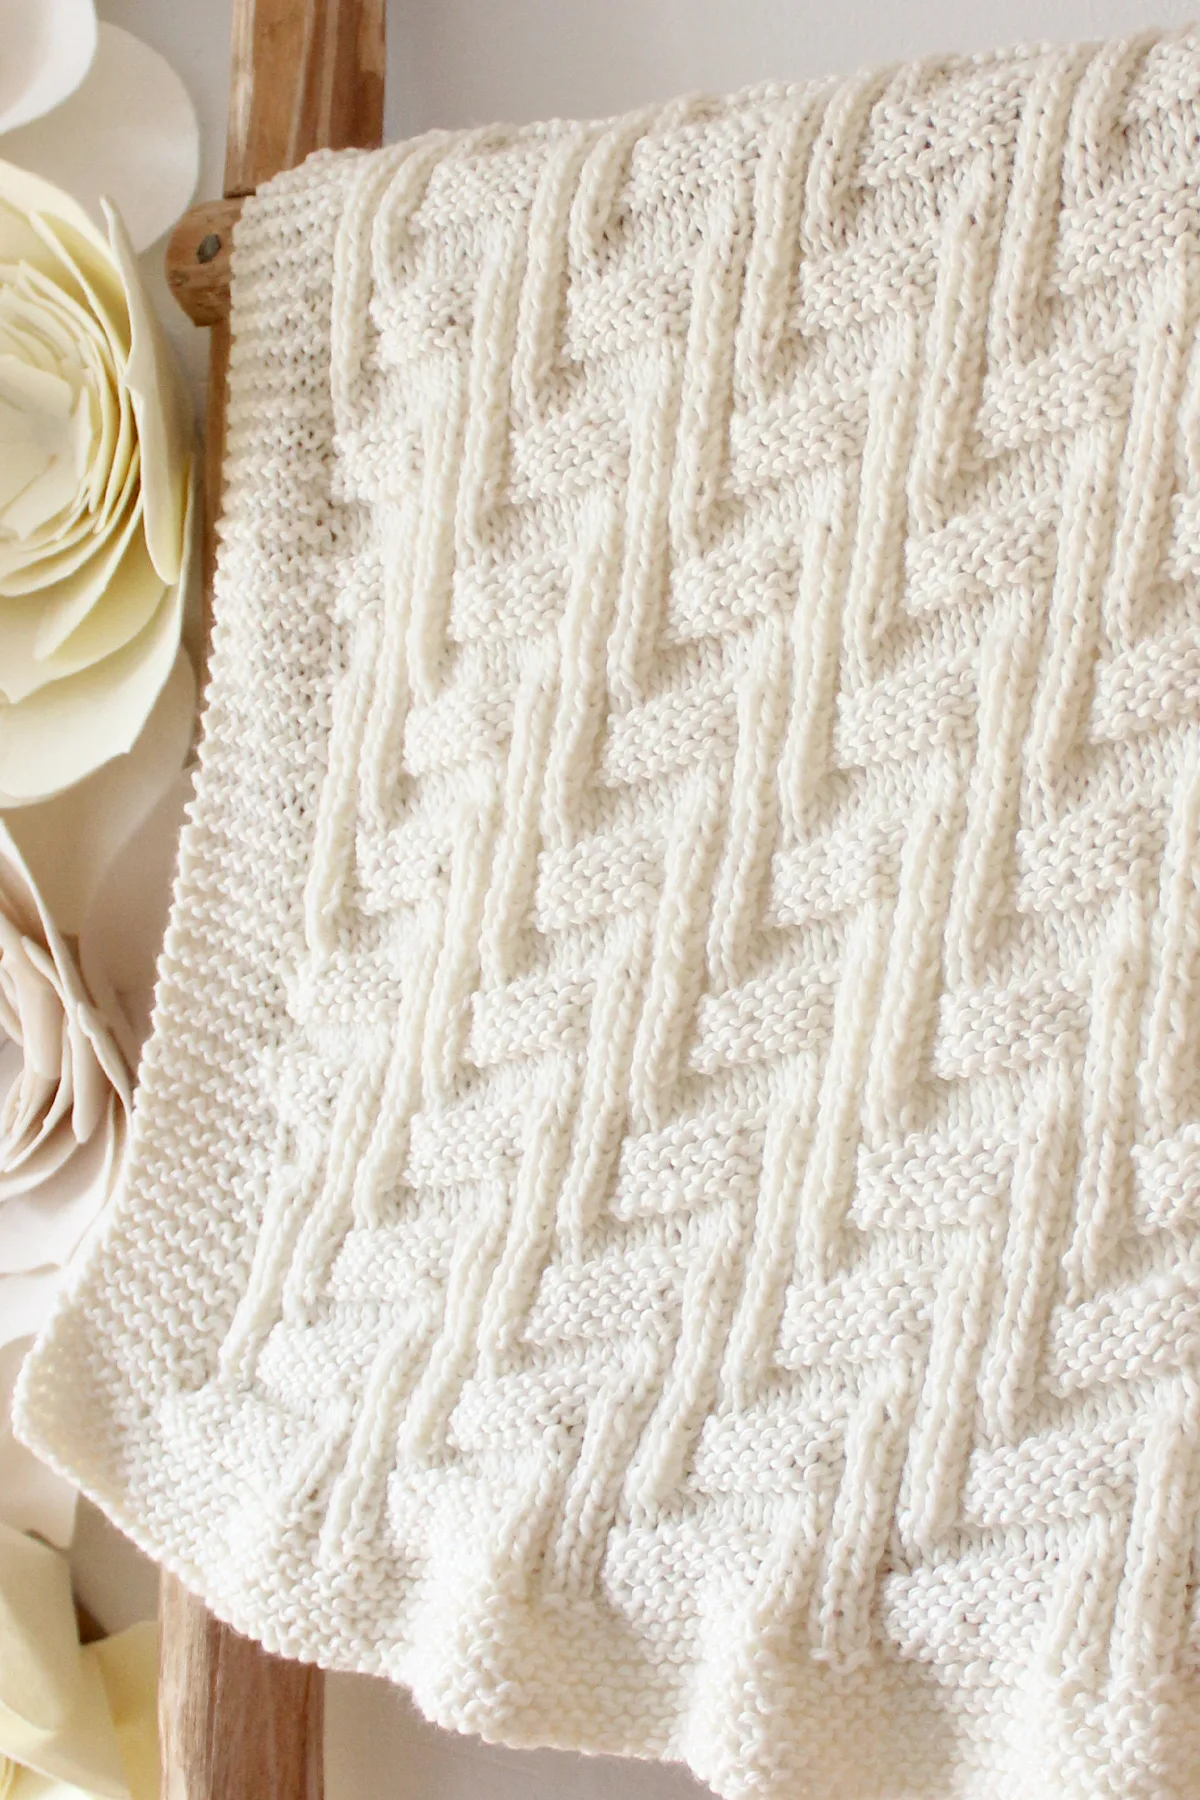 Knitted Blanket in zigzag stitch texture displayed on a wooden ladder in white yarn color.